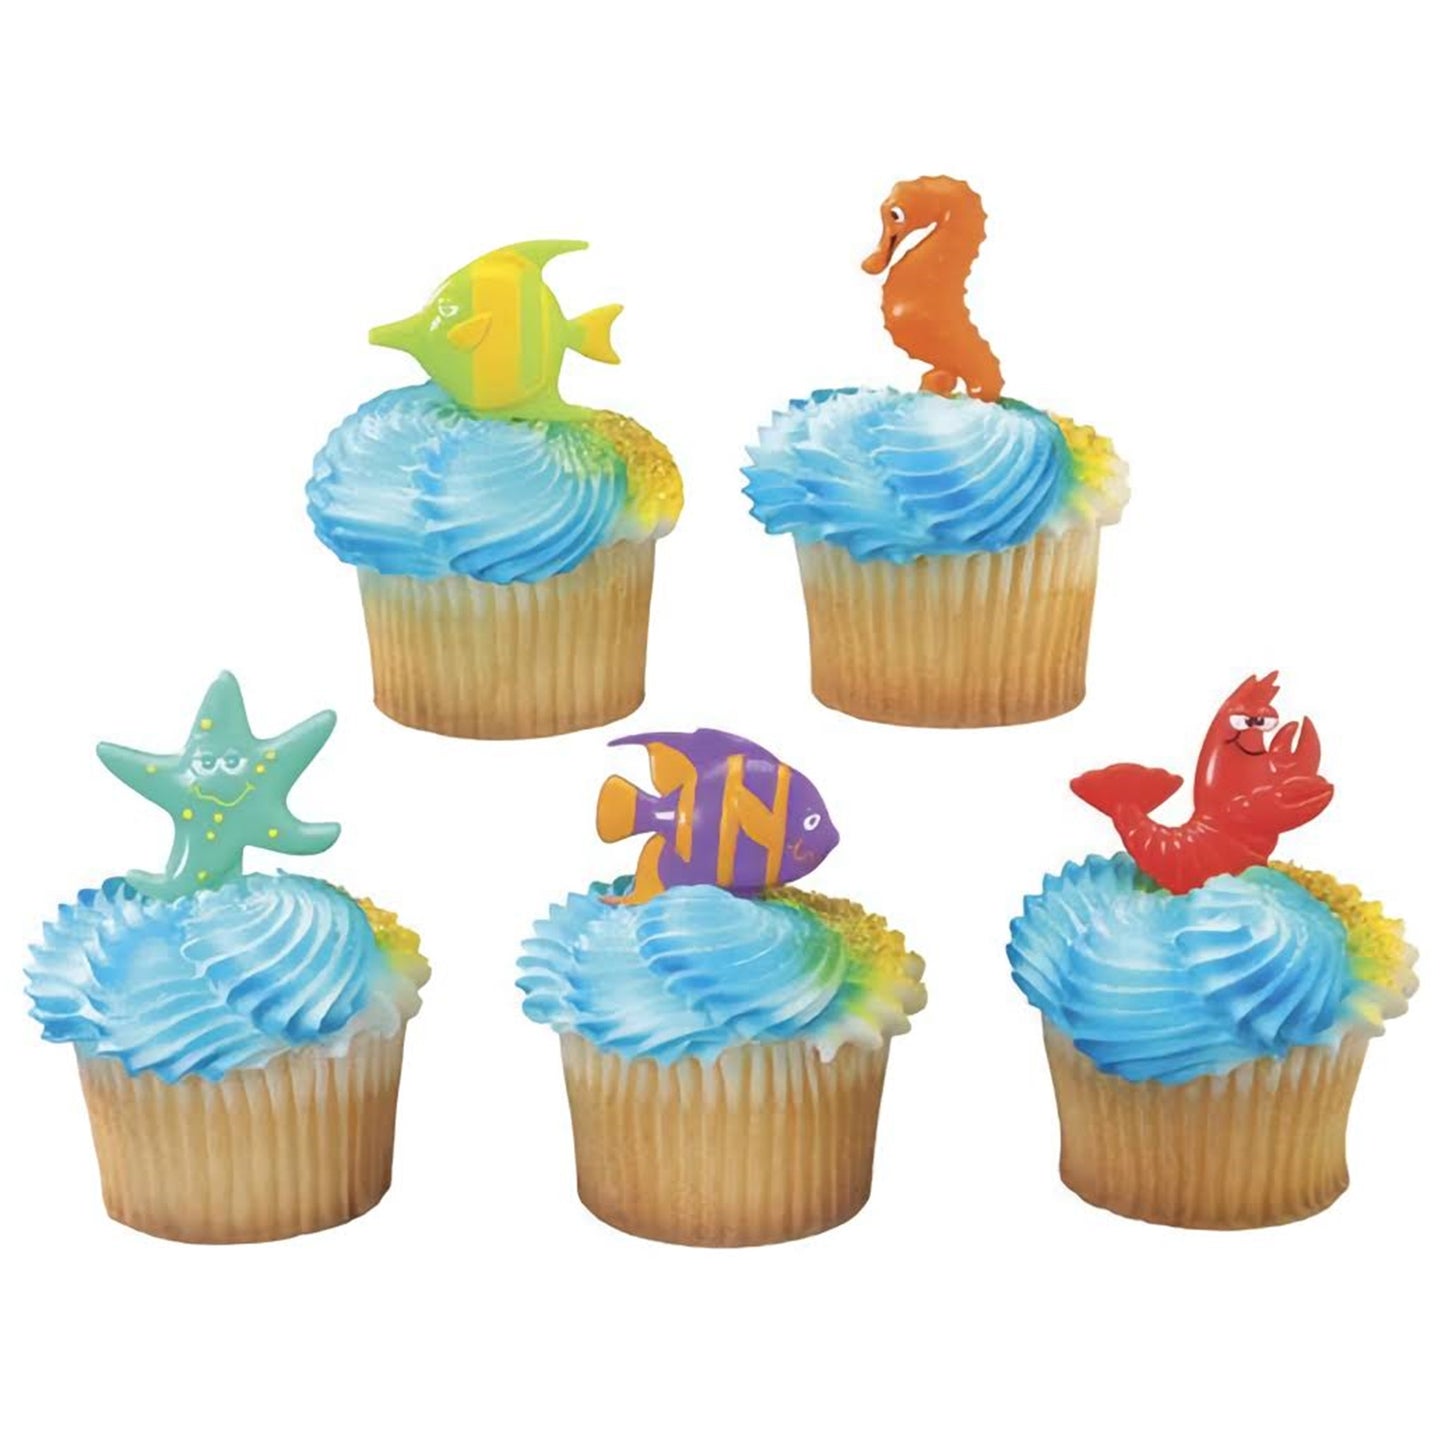 Colorful assortment of sea life cupcake topper picks featuring friendly cartoon-like starfish, seahorse, and fish, suitable for children's parties or sea-themed events.